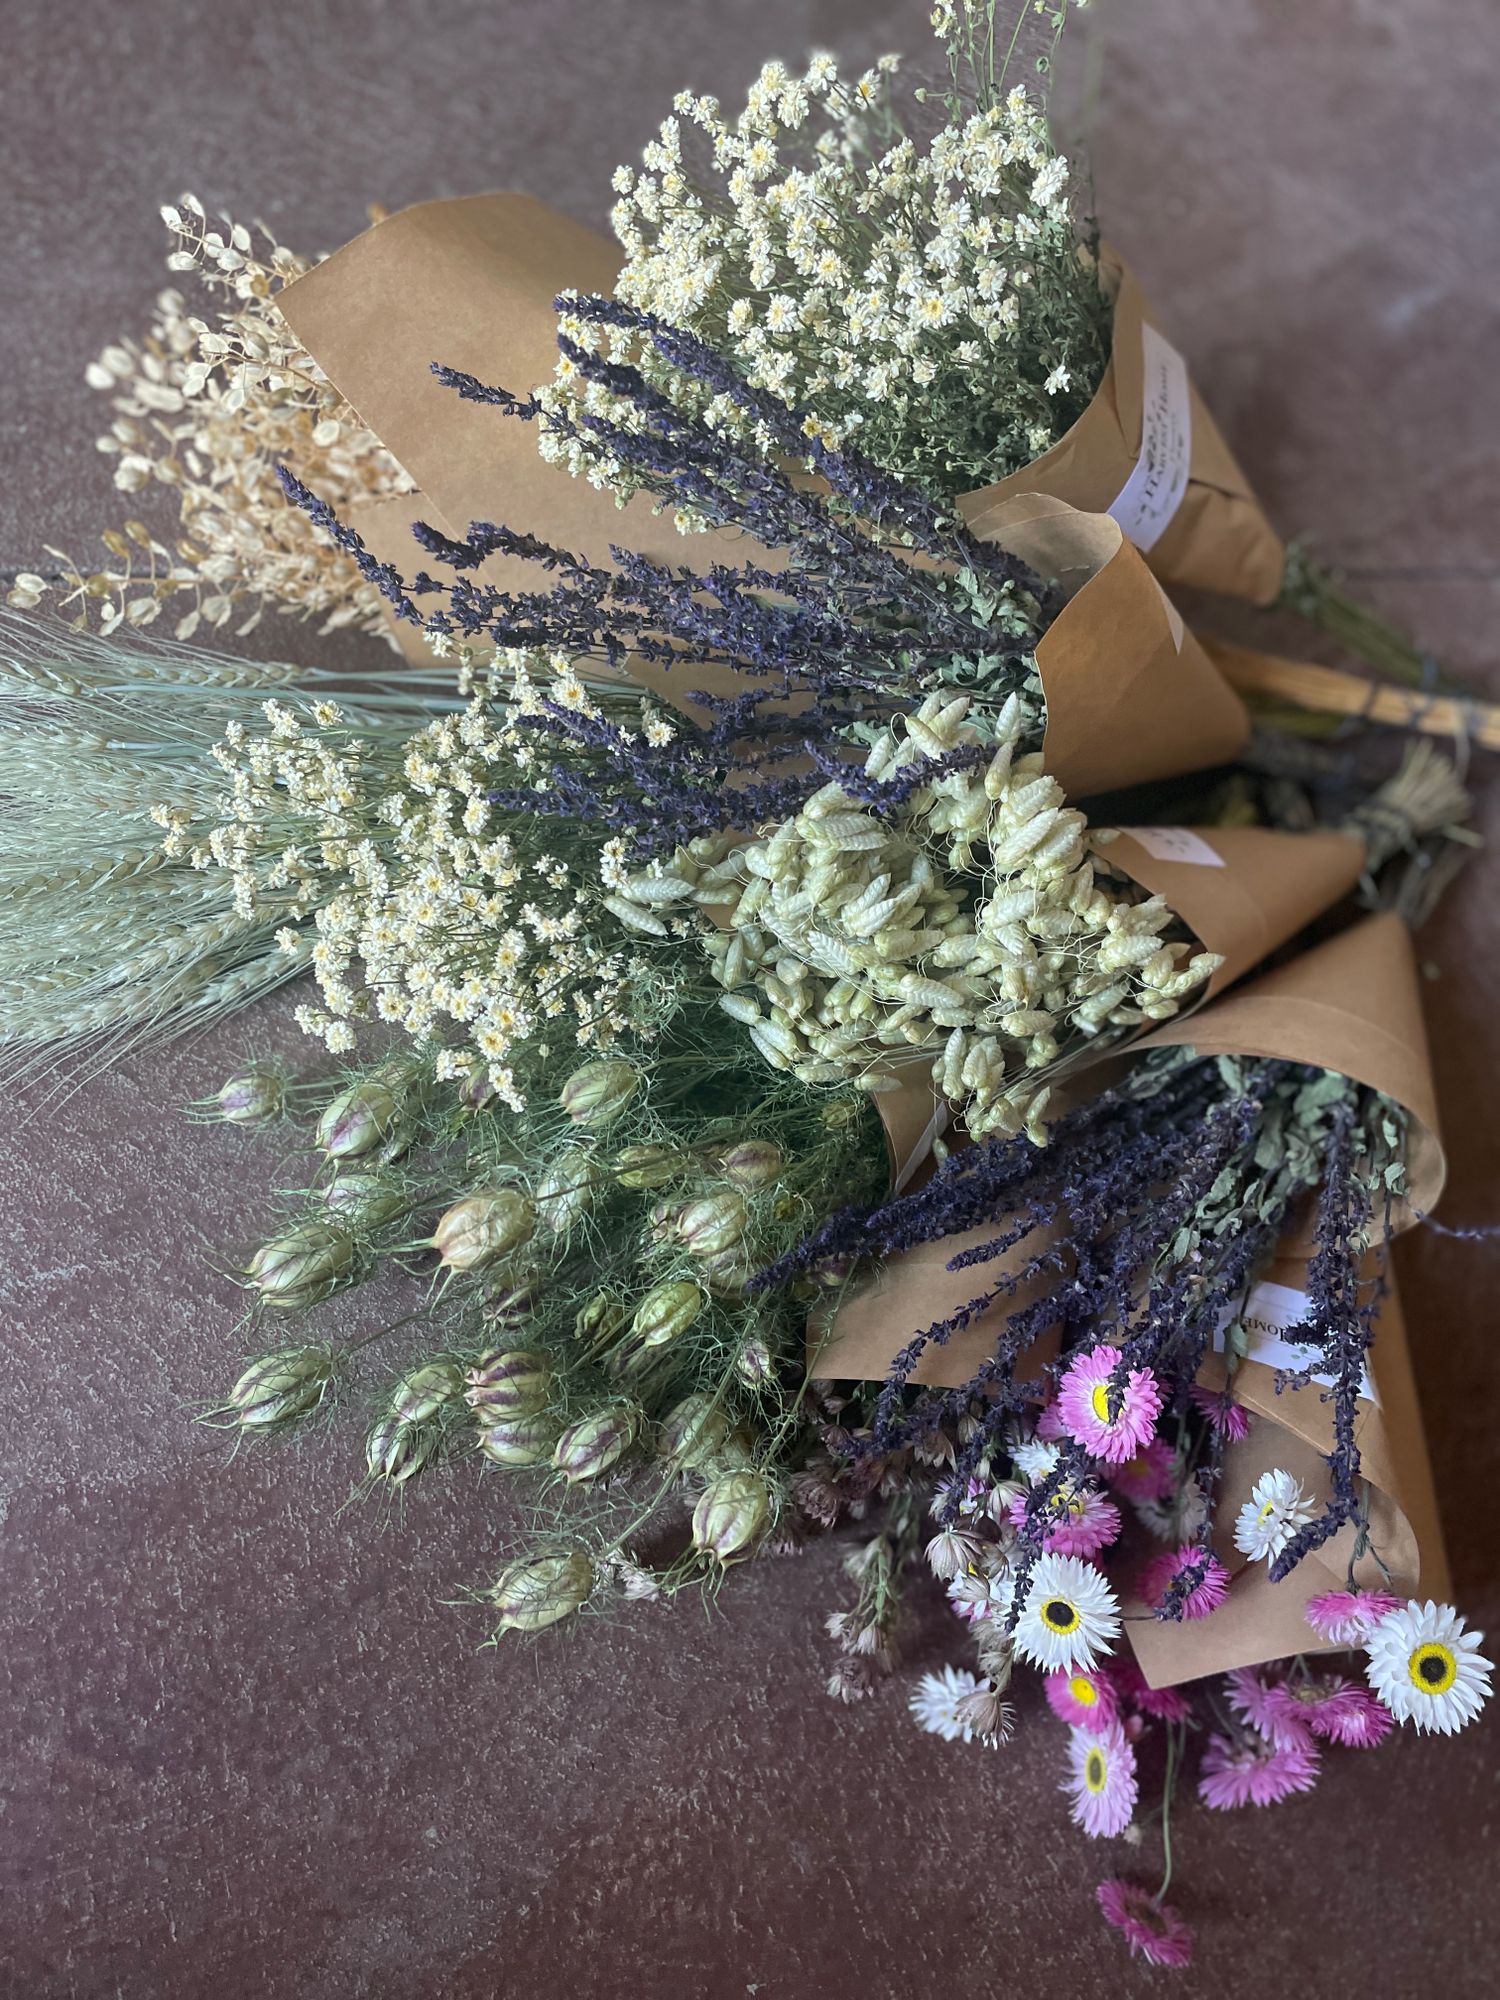 Variety of bunches of dried florals.